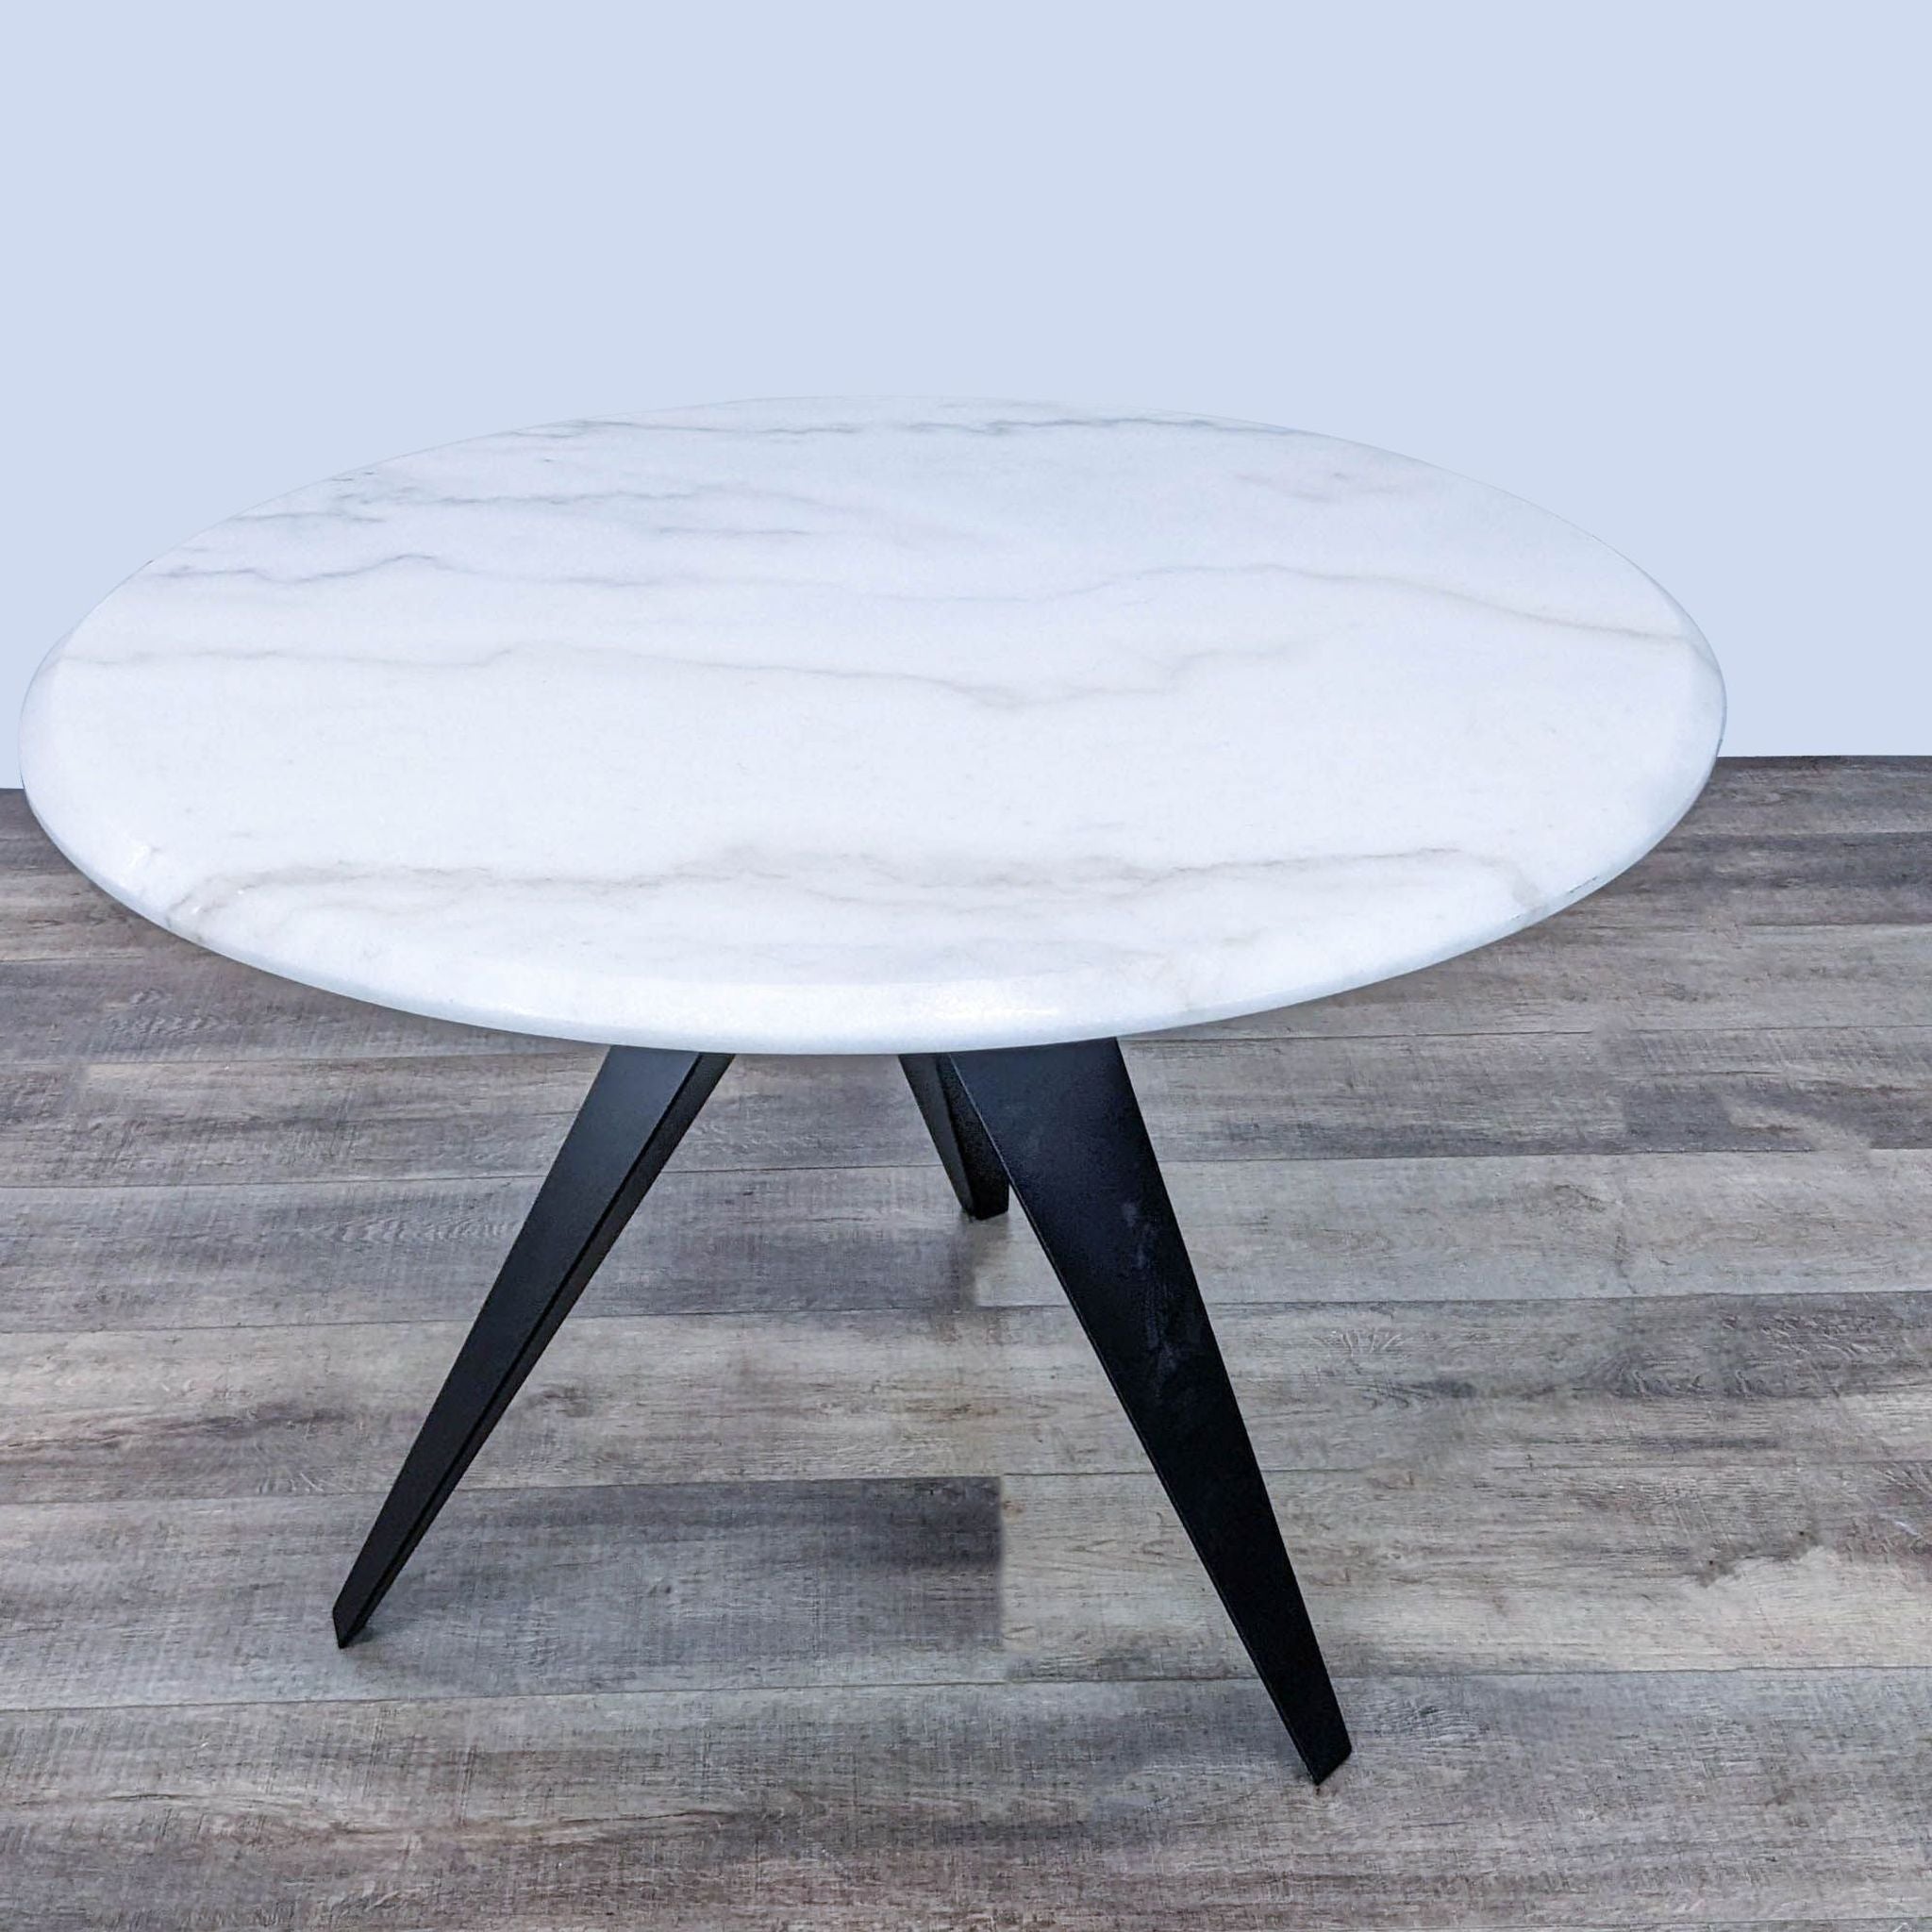 Minimalist Reperch dining table featuring a round marble surface with beveled edge and unique steel legs.